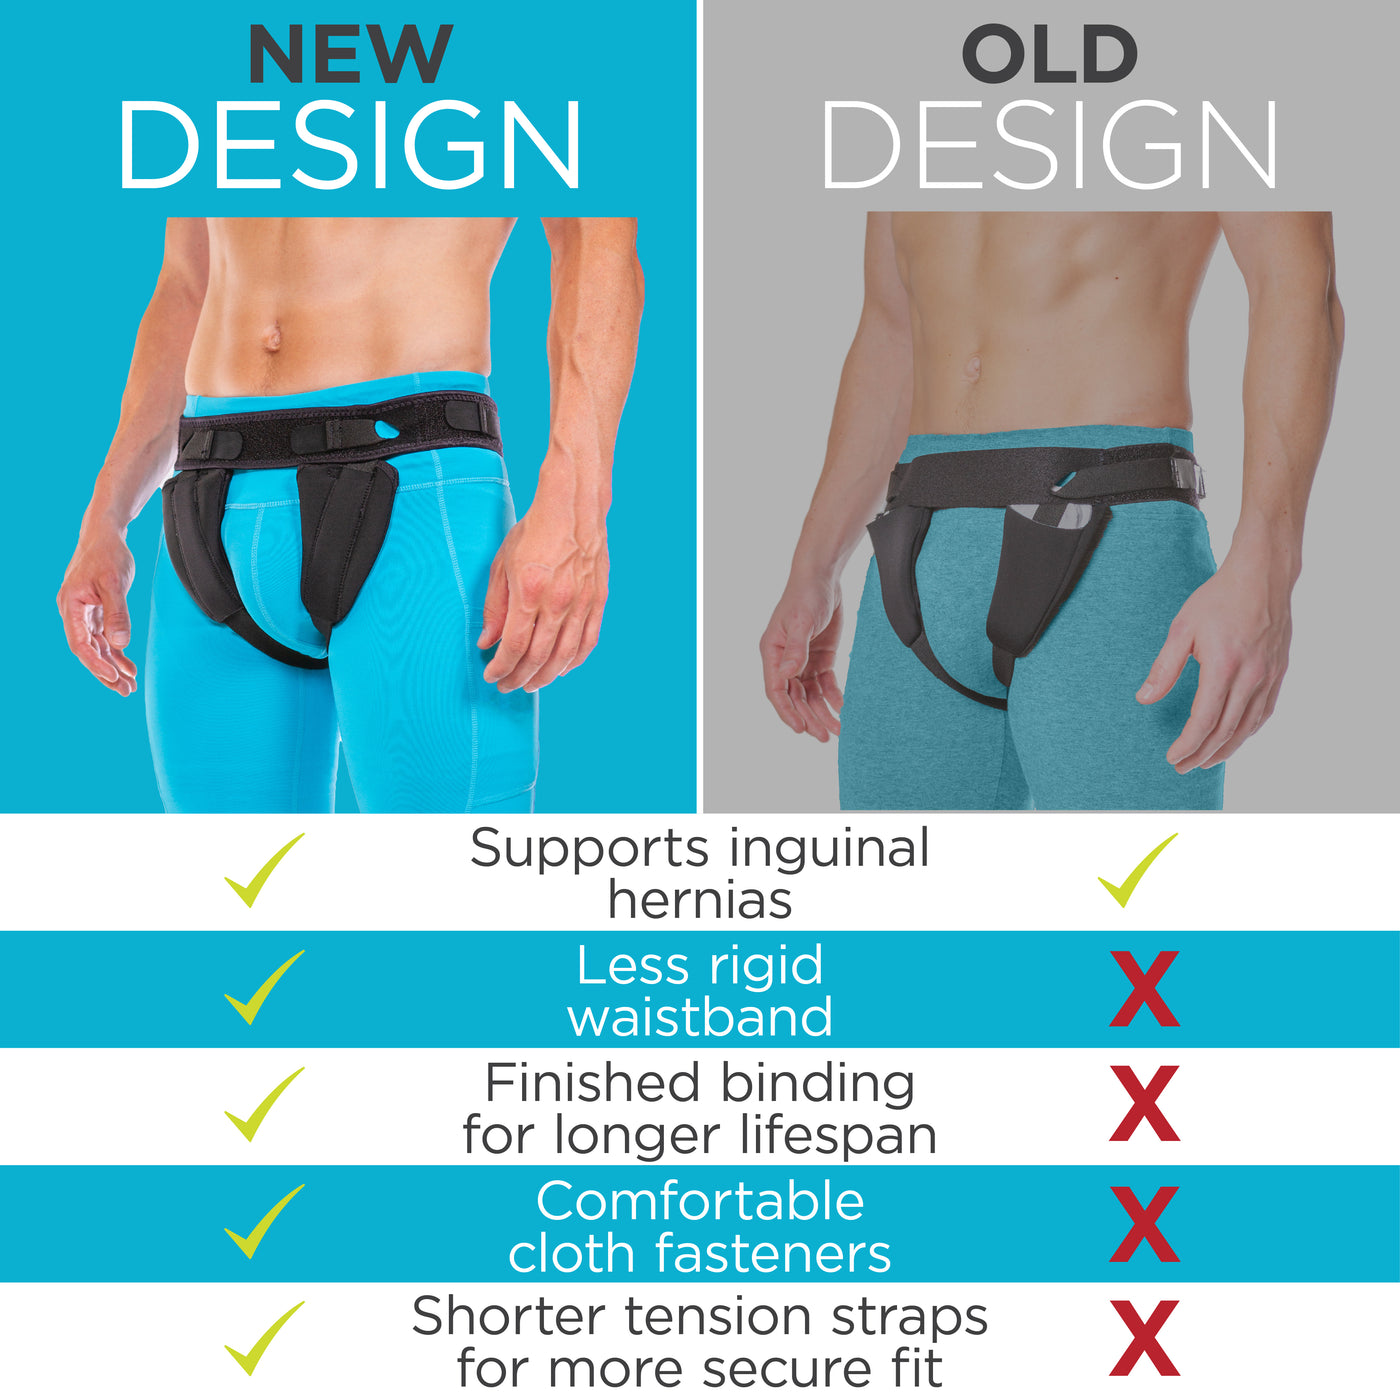 In July of 2020 we launch a new and improved inguinal hernia belt that is more comfortable and uses high quality materials